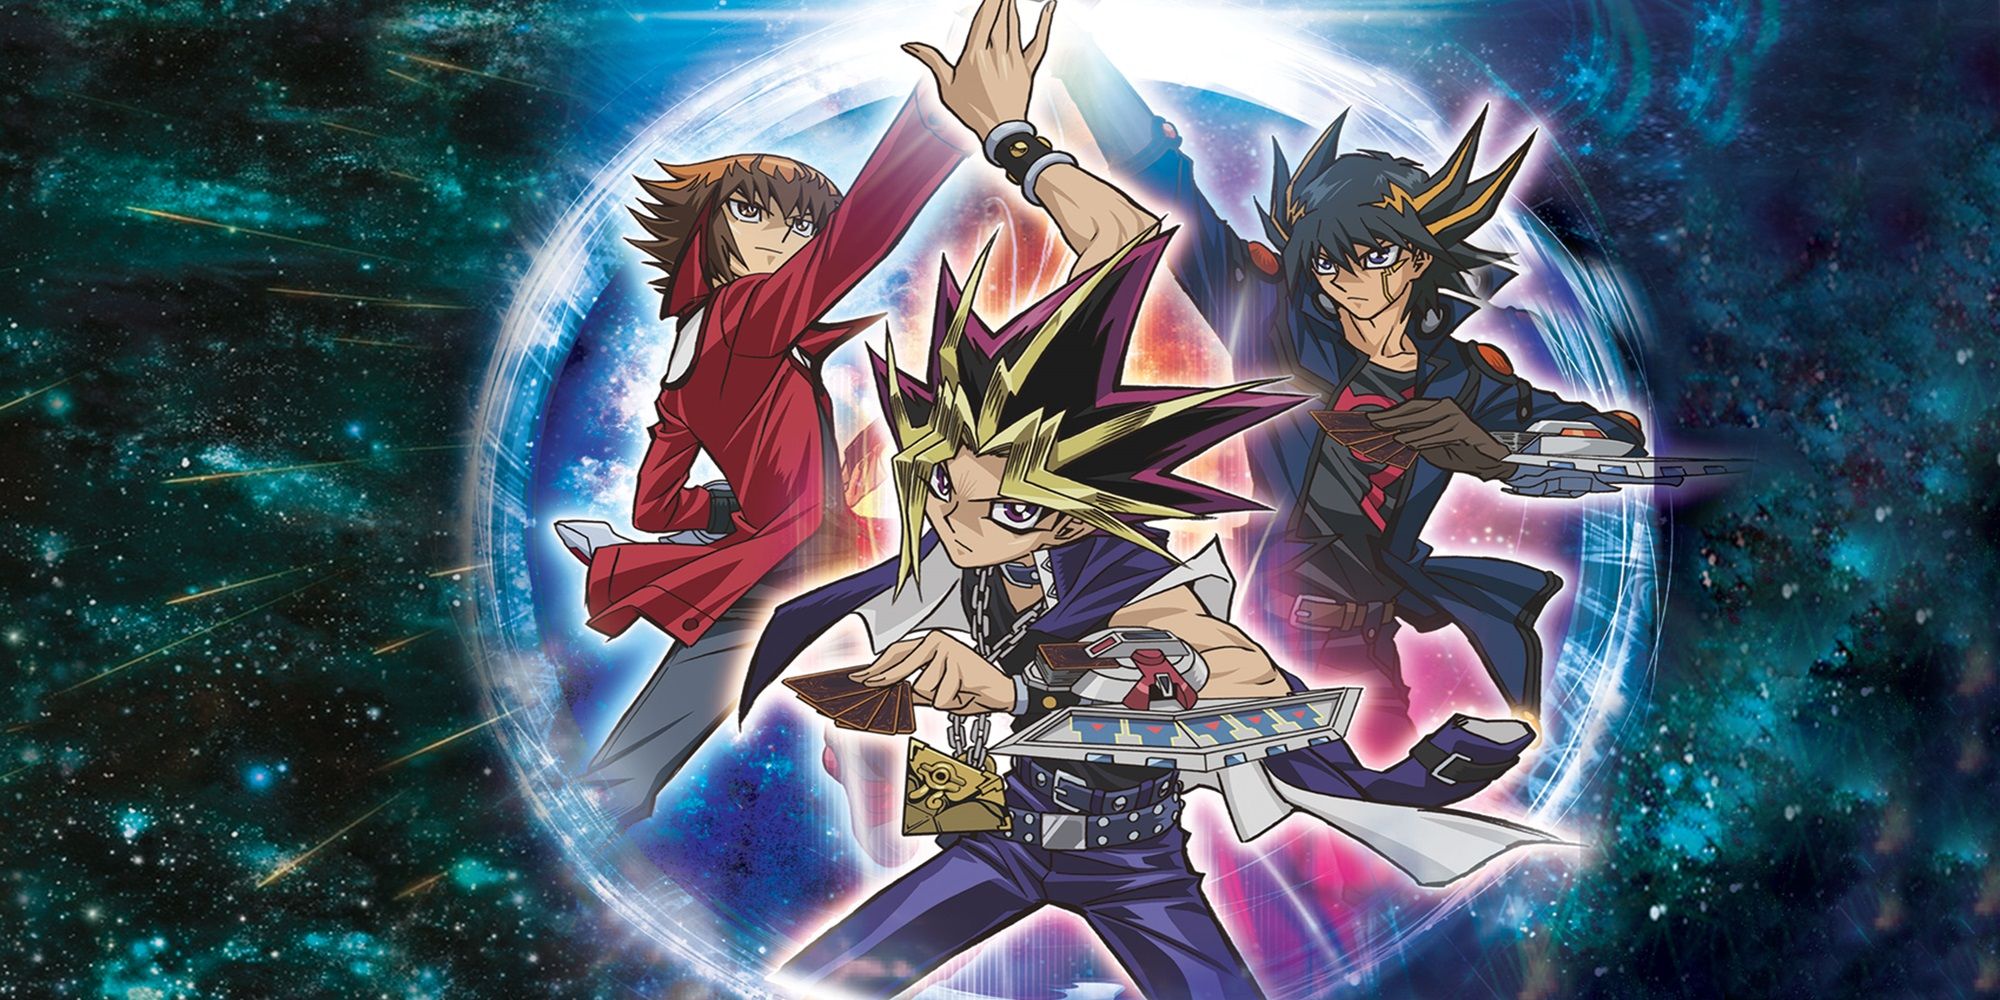 Yugioh 3D Bonds Beyond Time Visual featuring Yugi and two other Yu-Gi-Oh! anime protagonists preparing to duel.